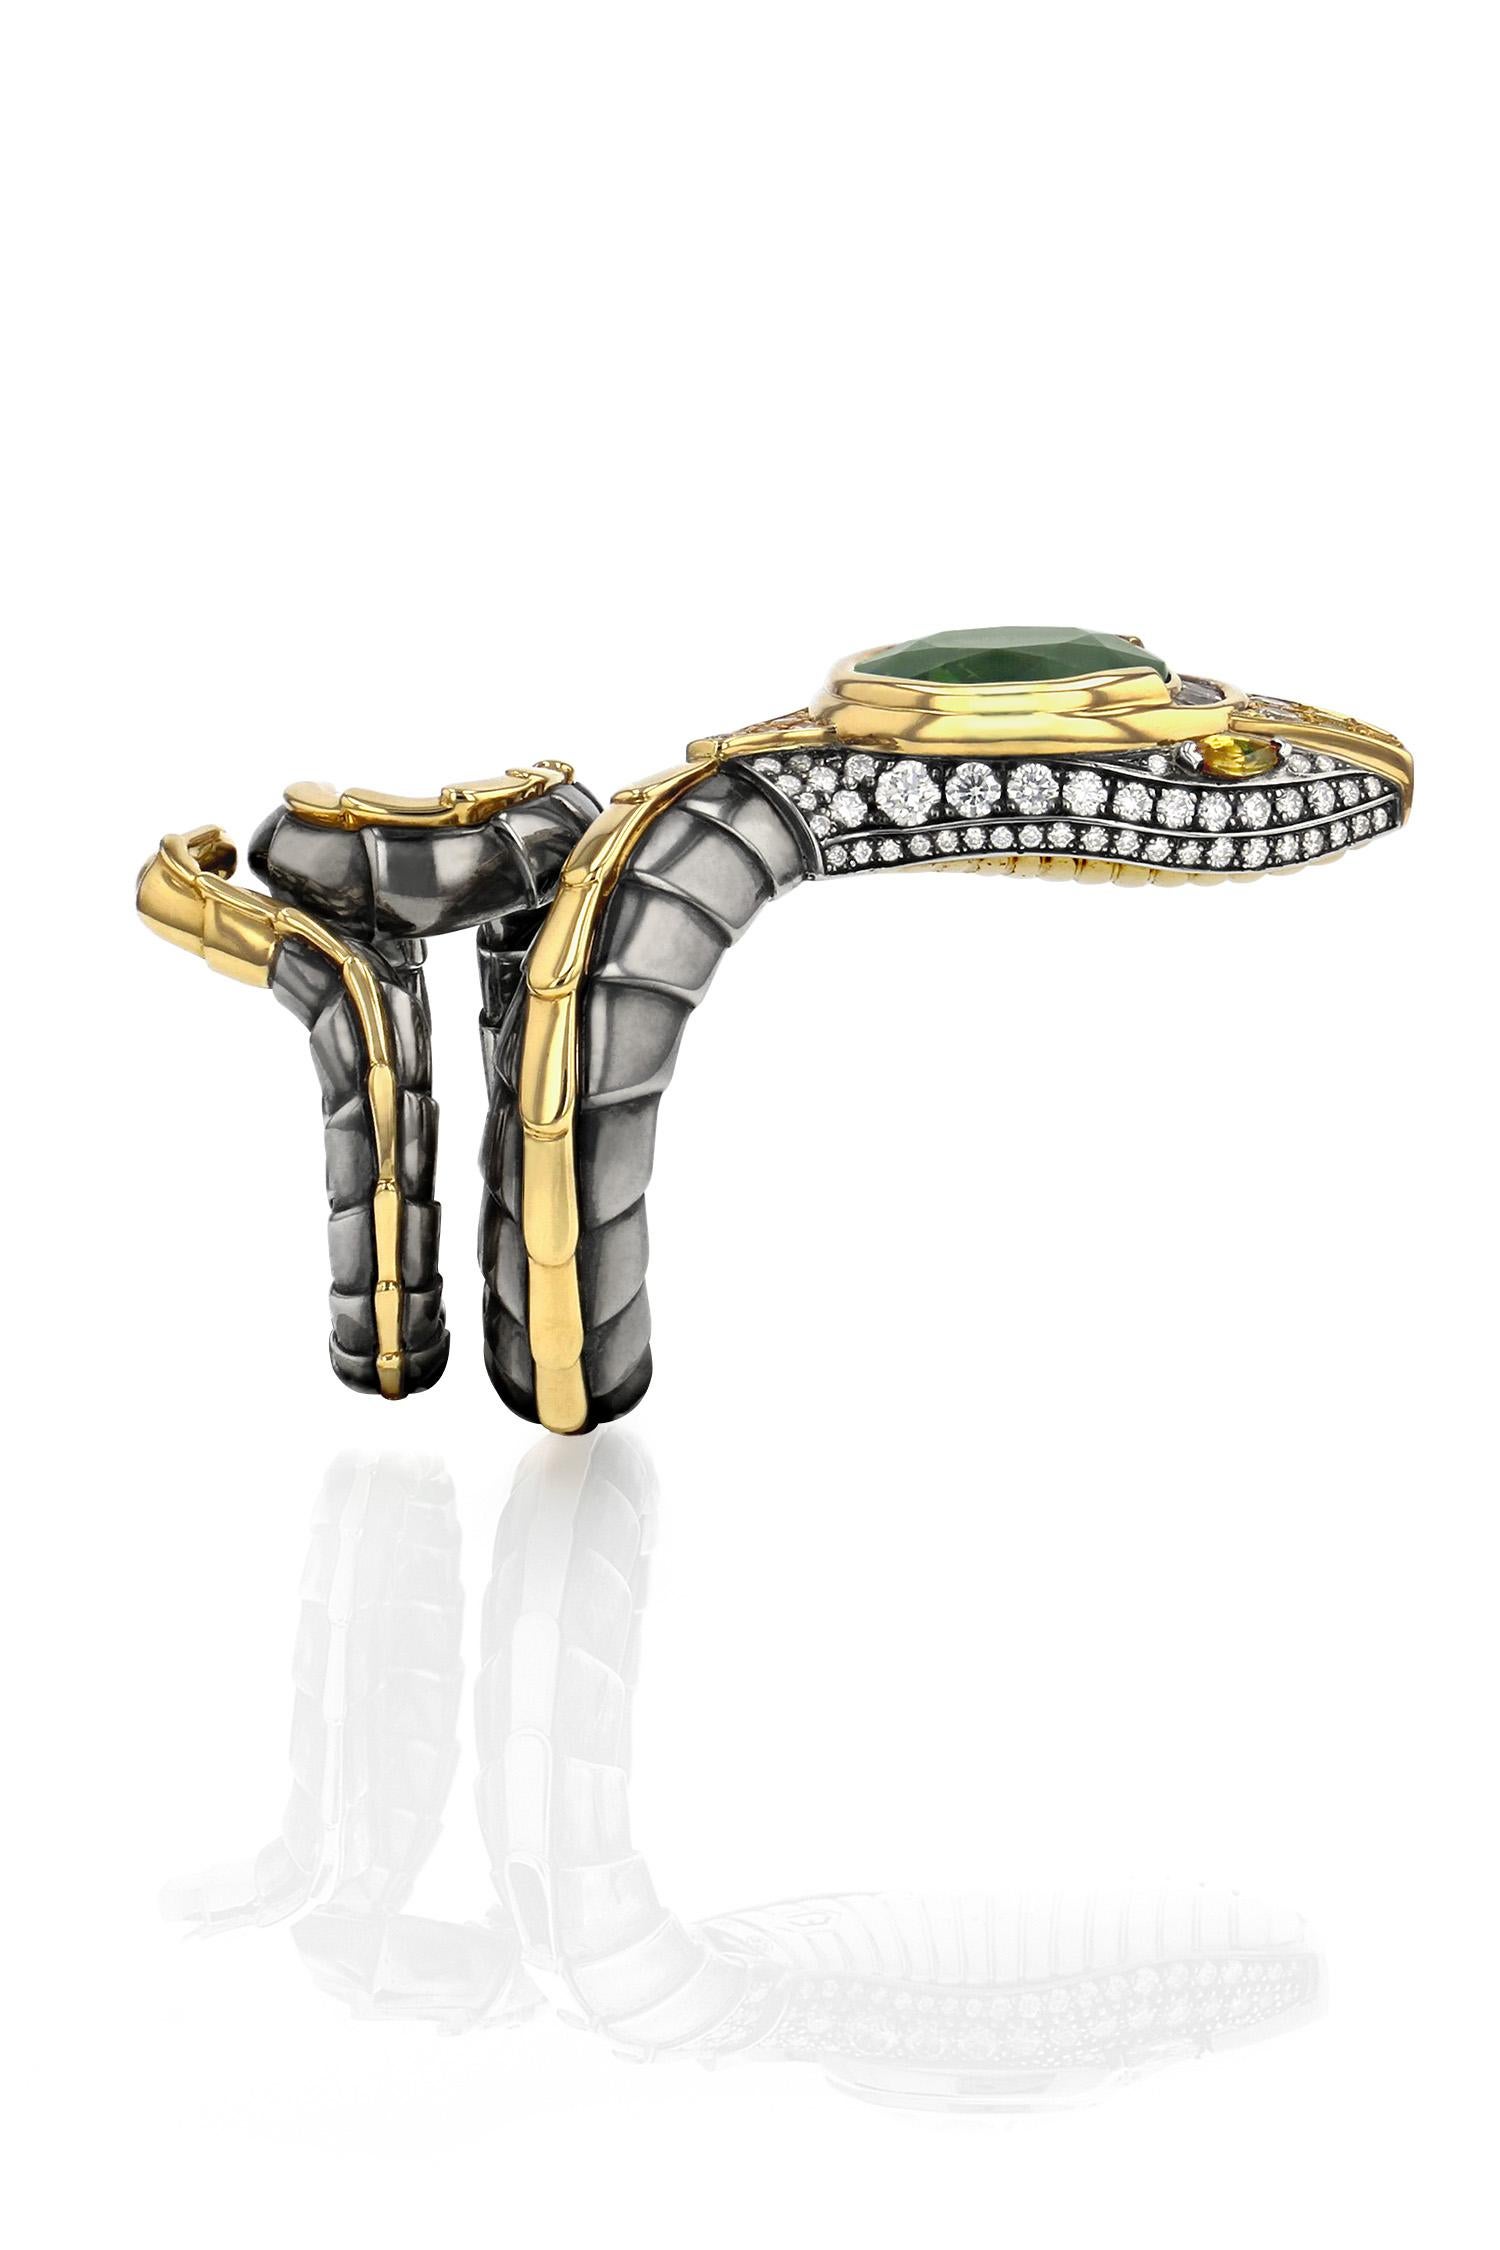 Oval Cut Green Sapphire Serpent Ring in 18k Yellow Gold & Distressed Silver by Elie Top For Sale